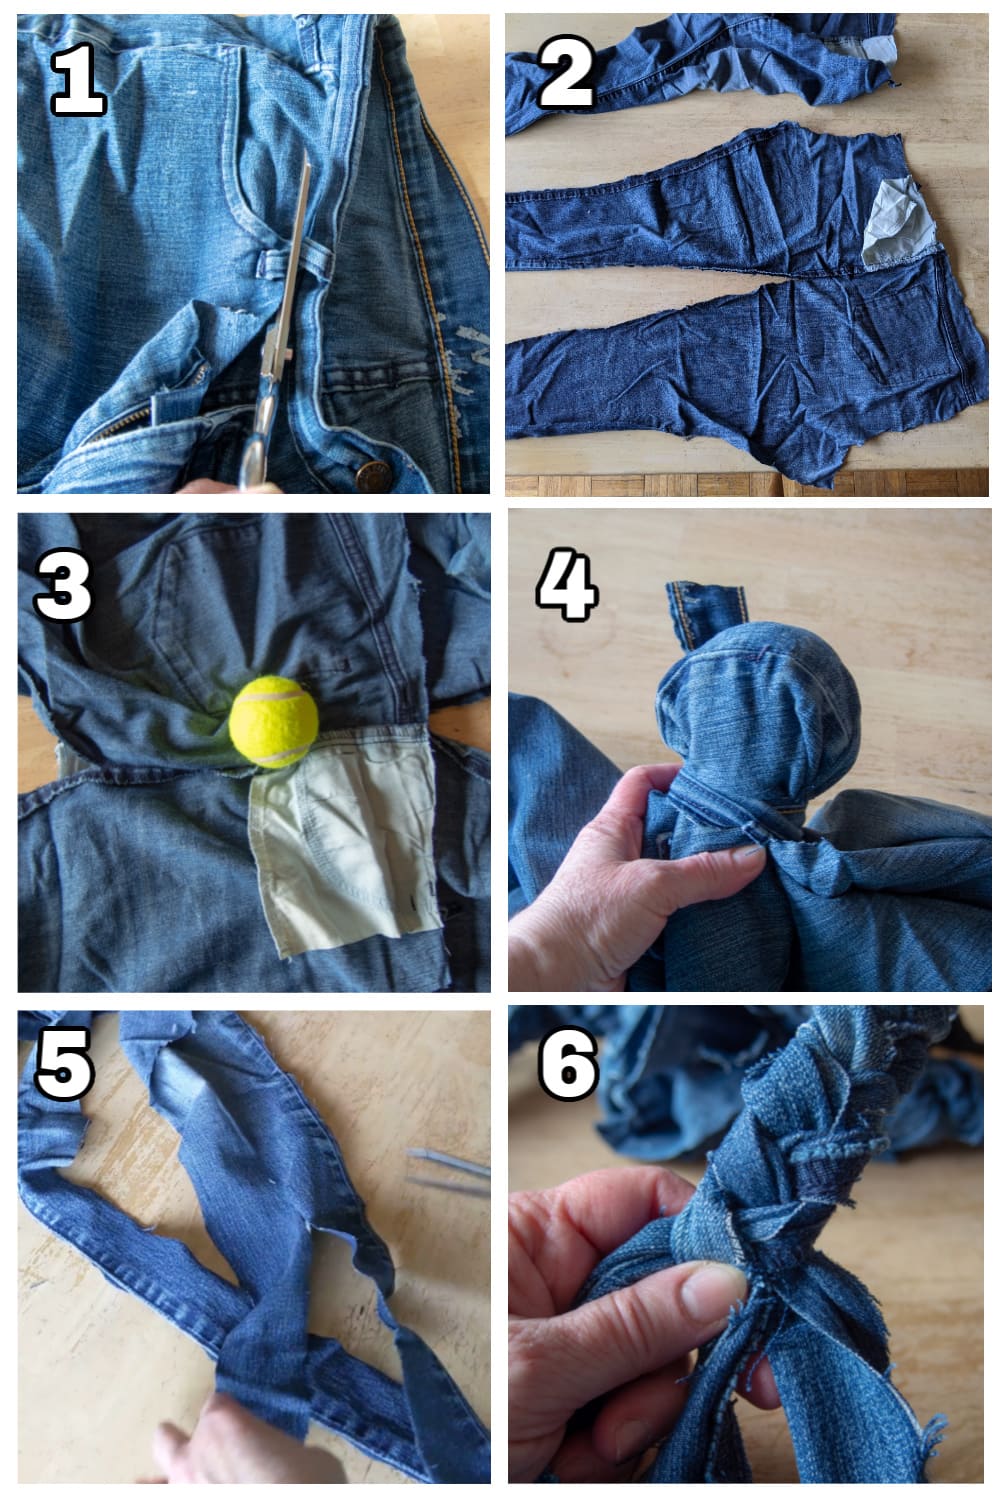 collage showing steps for creating dog toy